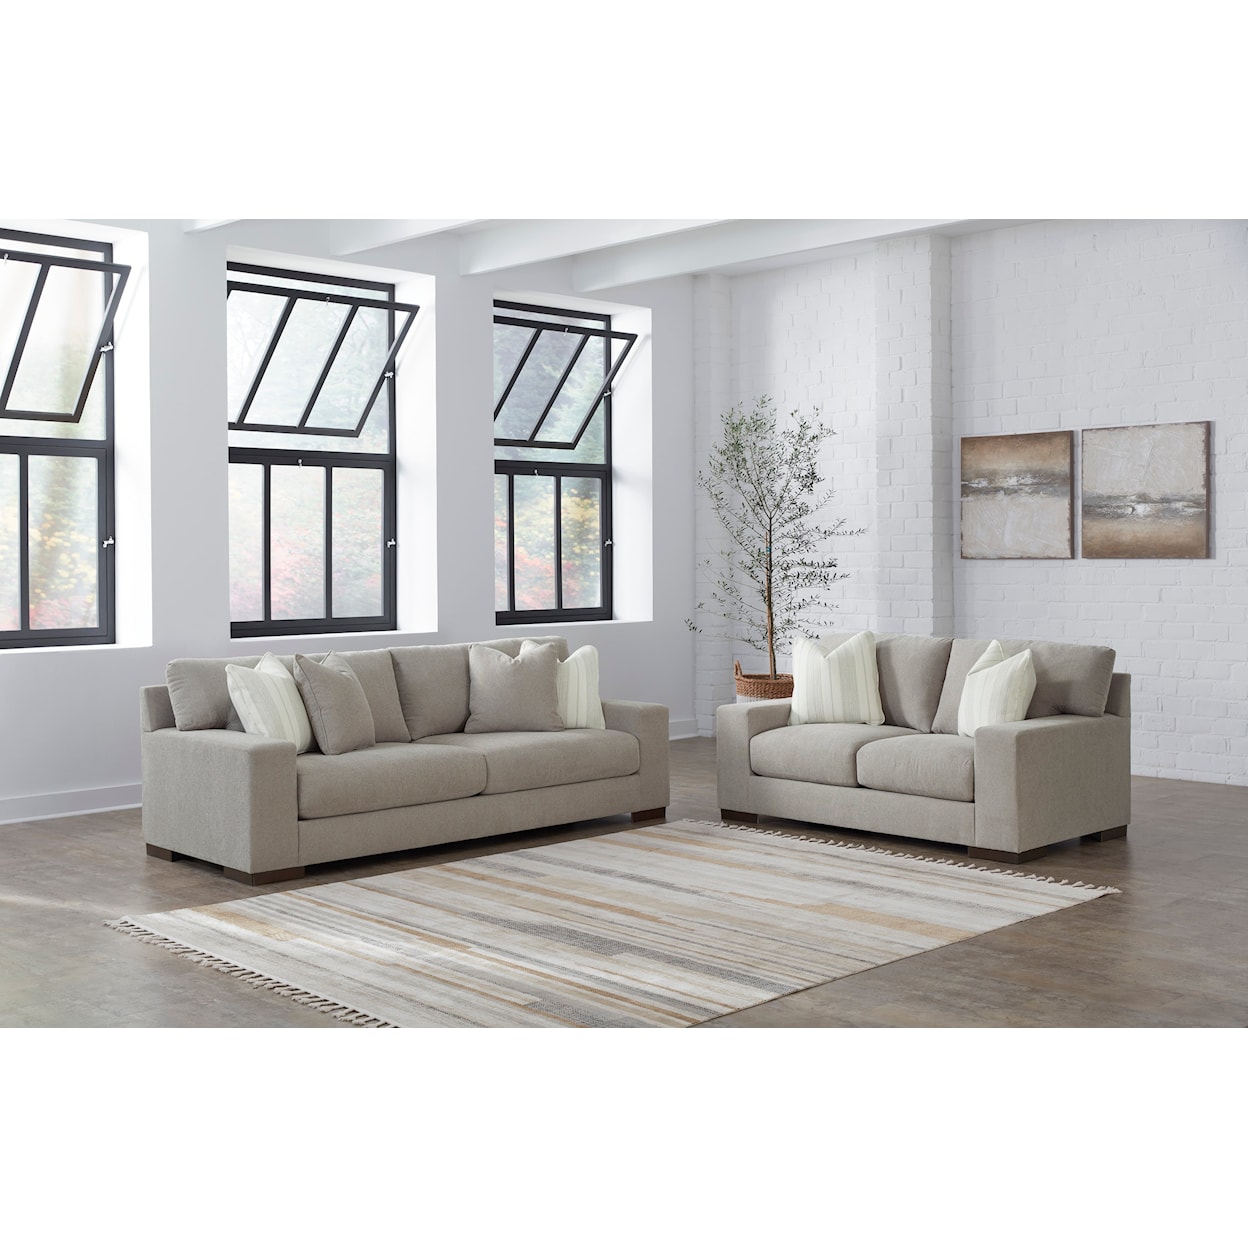 Signature Design by Ashley Maggie Living Room Set